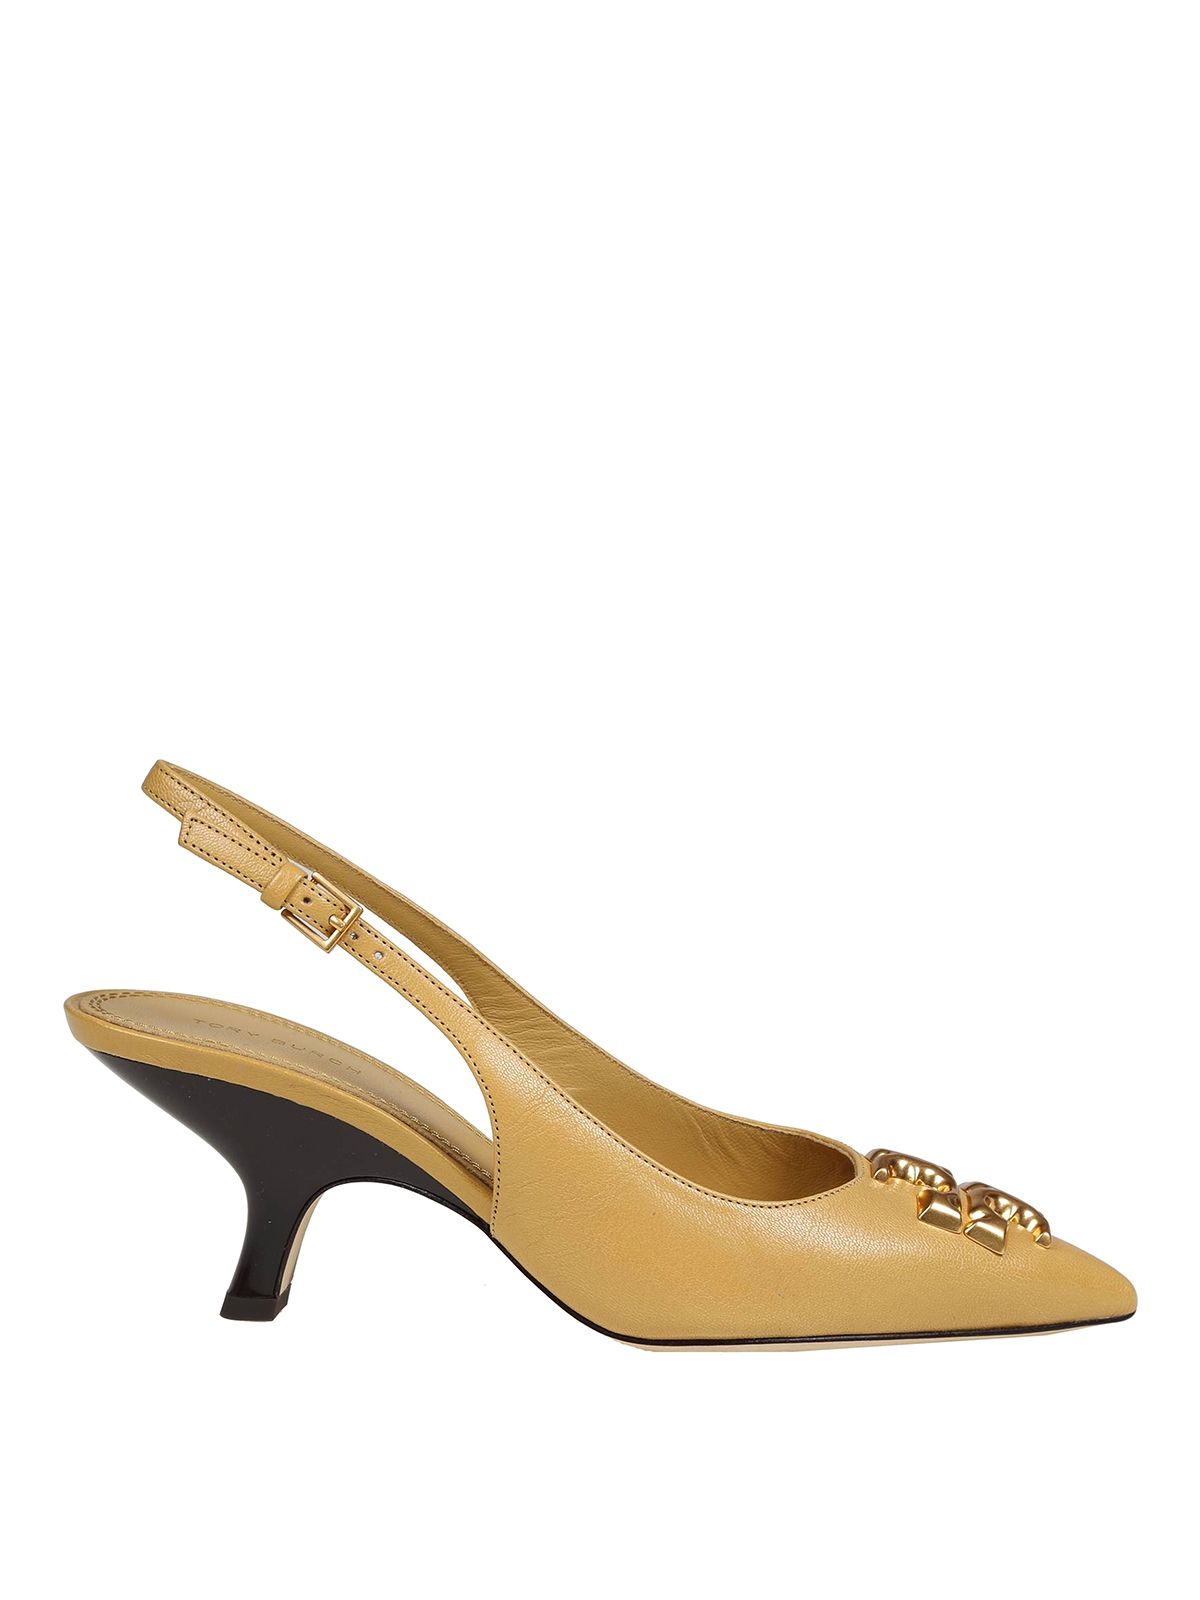 Tory Burch Eleanor Pump In Sand Buff Leather In Beis